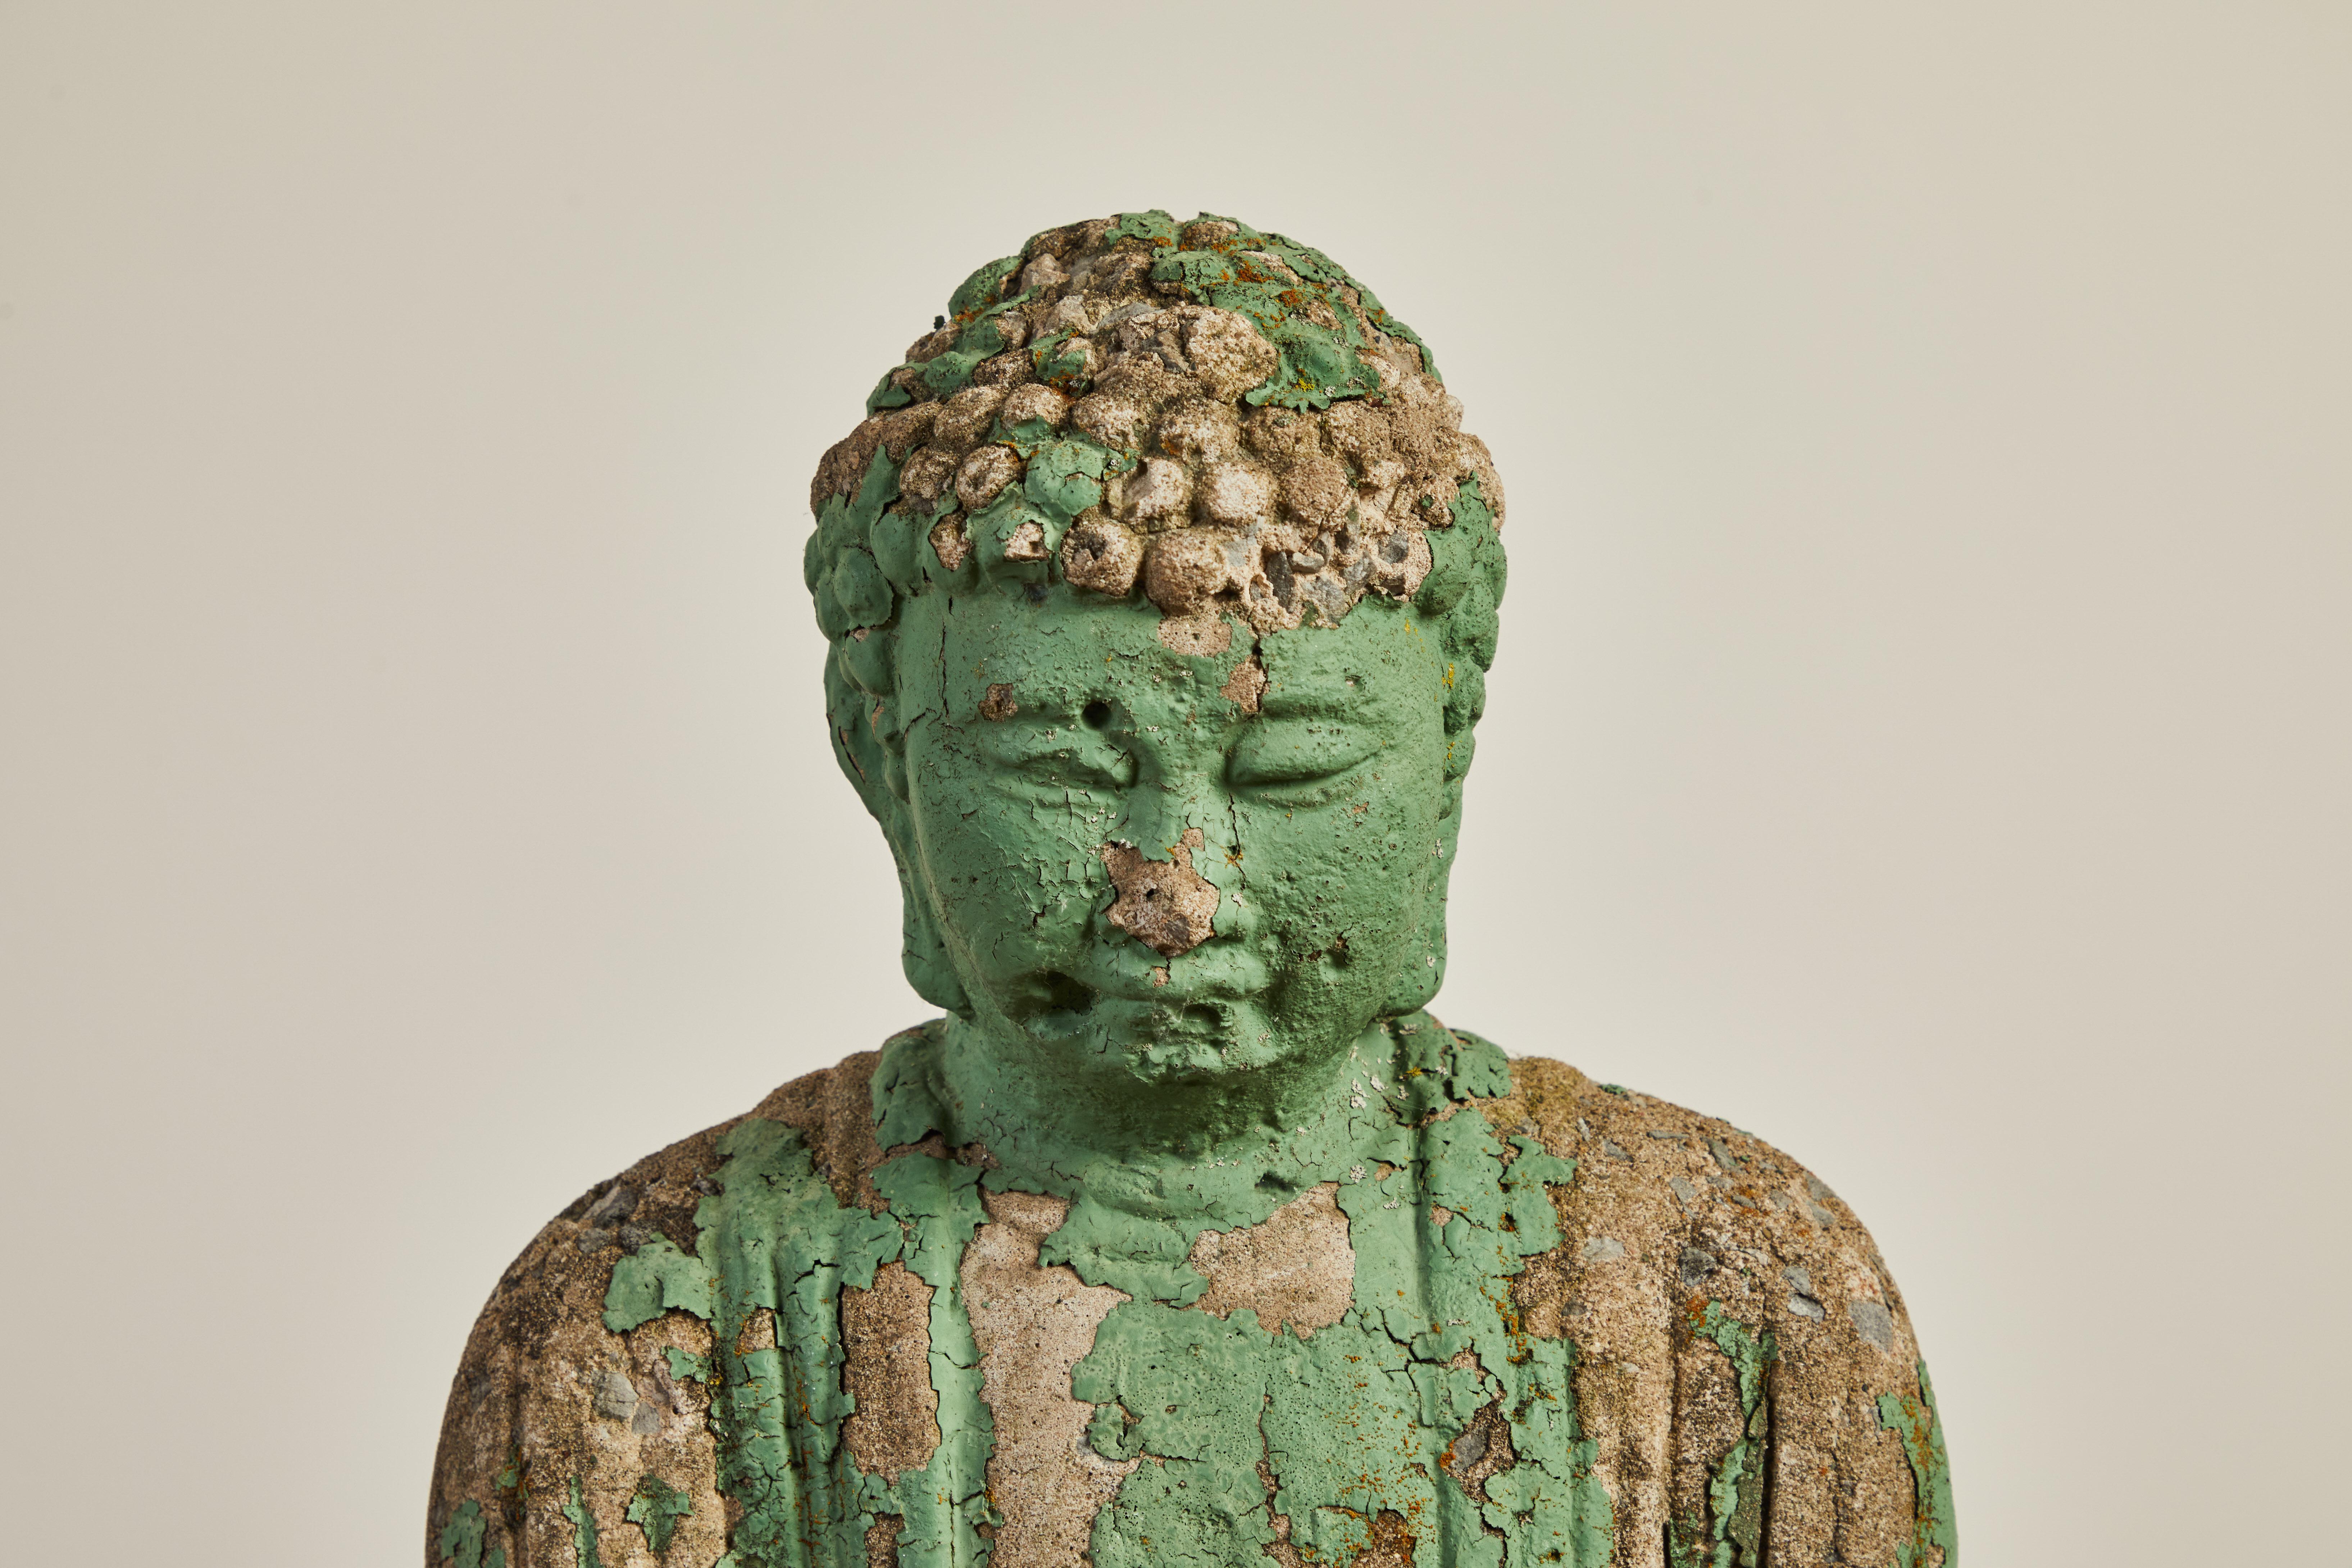 Vintage Buddha with original green paint with heavy patina. The sculpture can be applied indoors or outdoors.